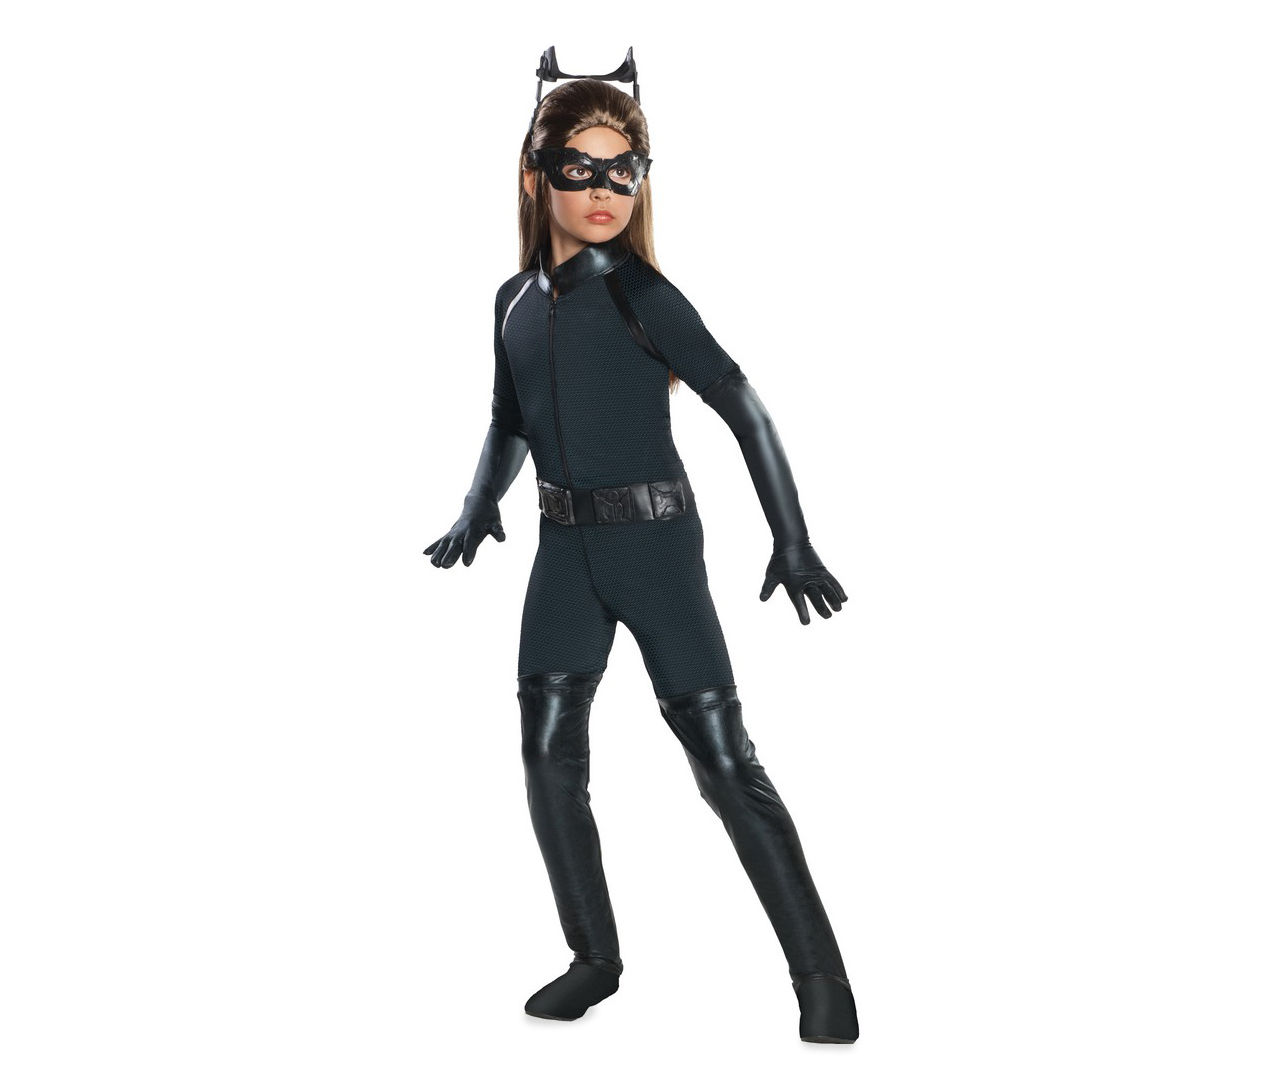 Kids Size X-Large The Dark Knight Rises Deluxe Catwoman Costume